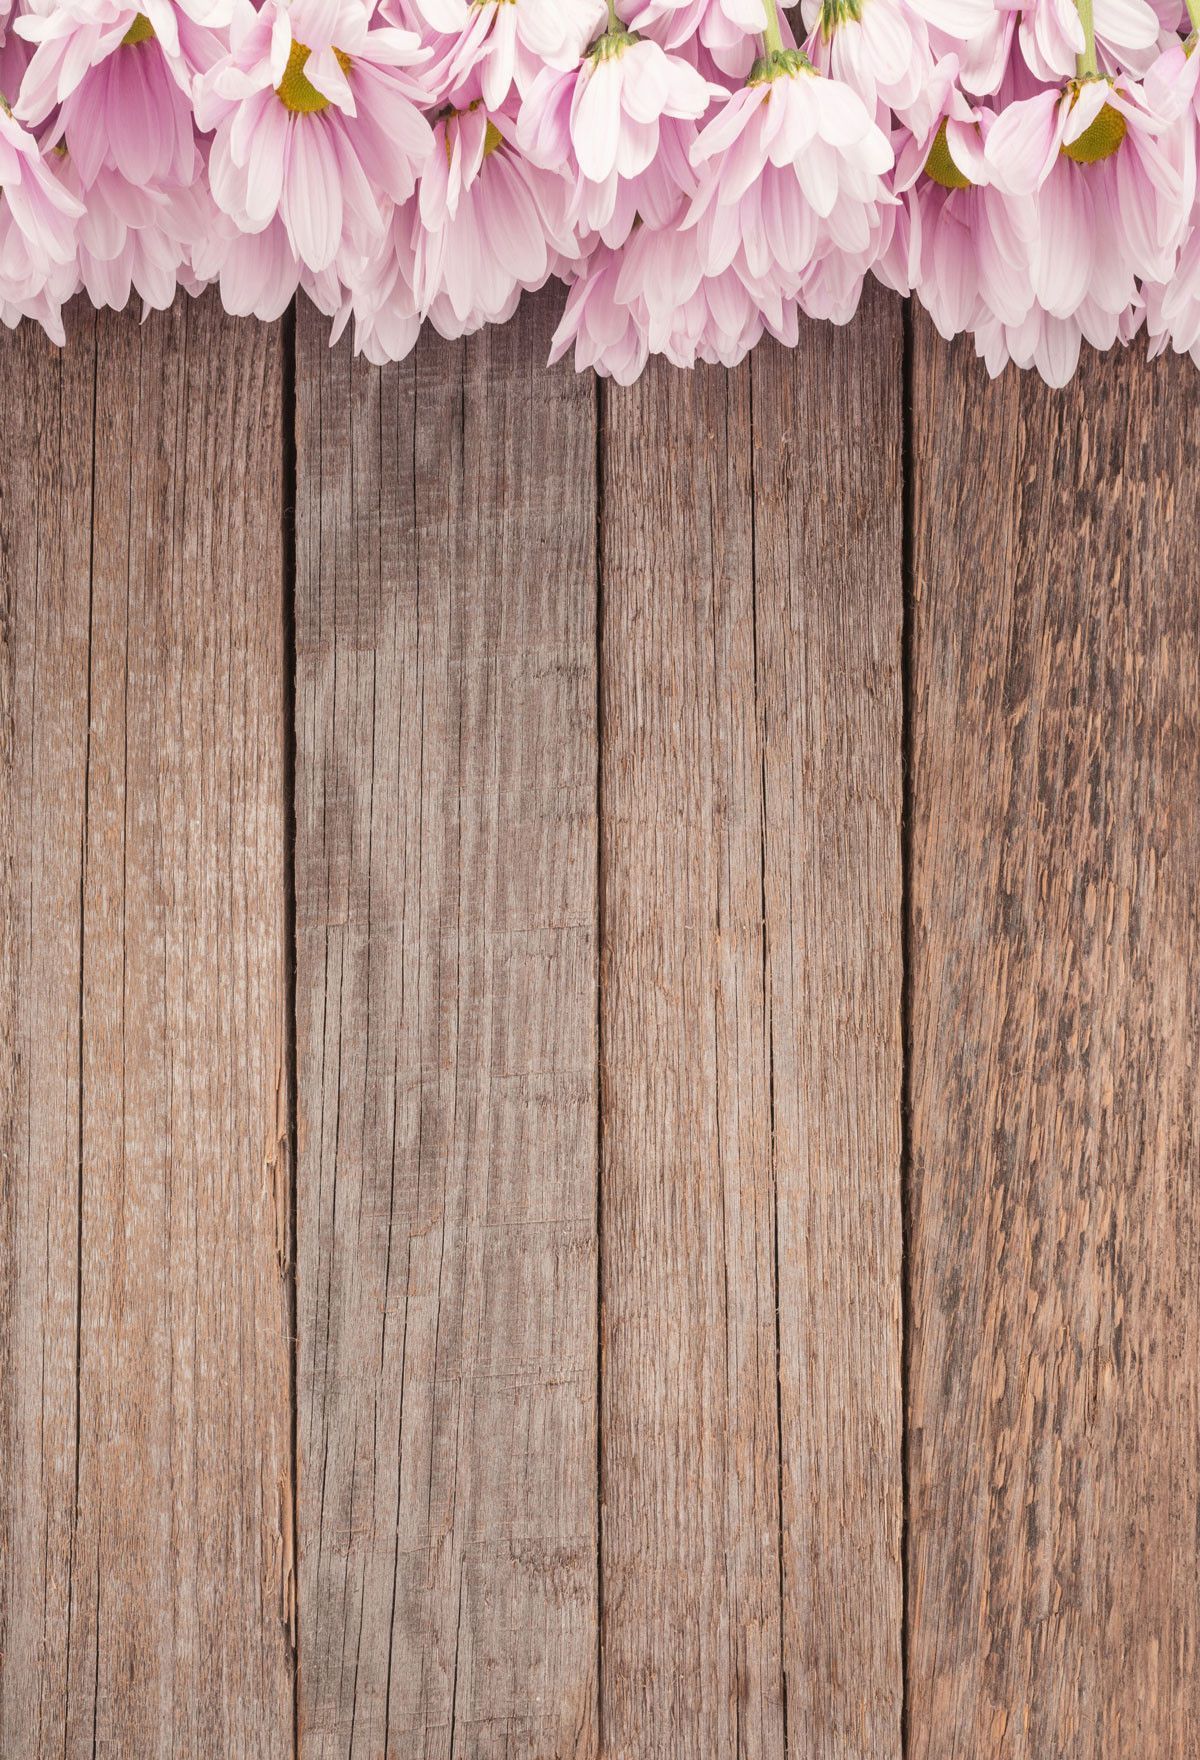 Flowers on wooden background  Photo